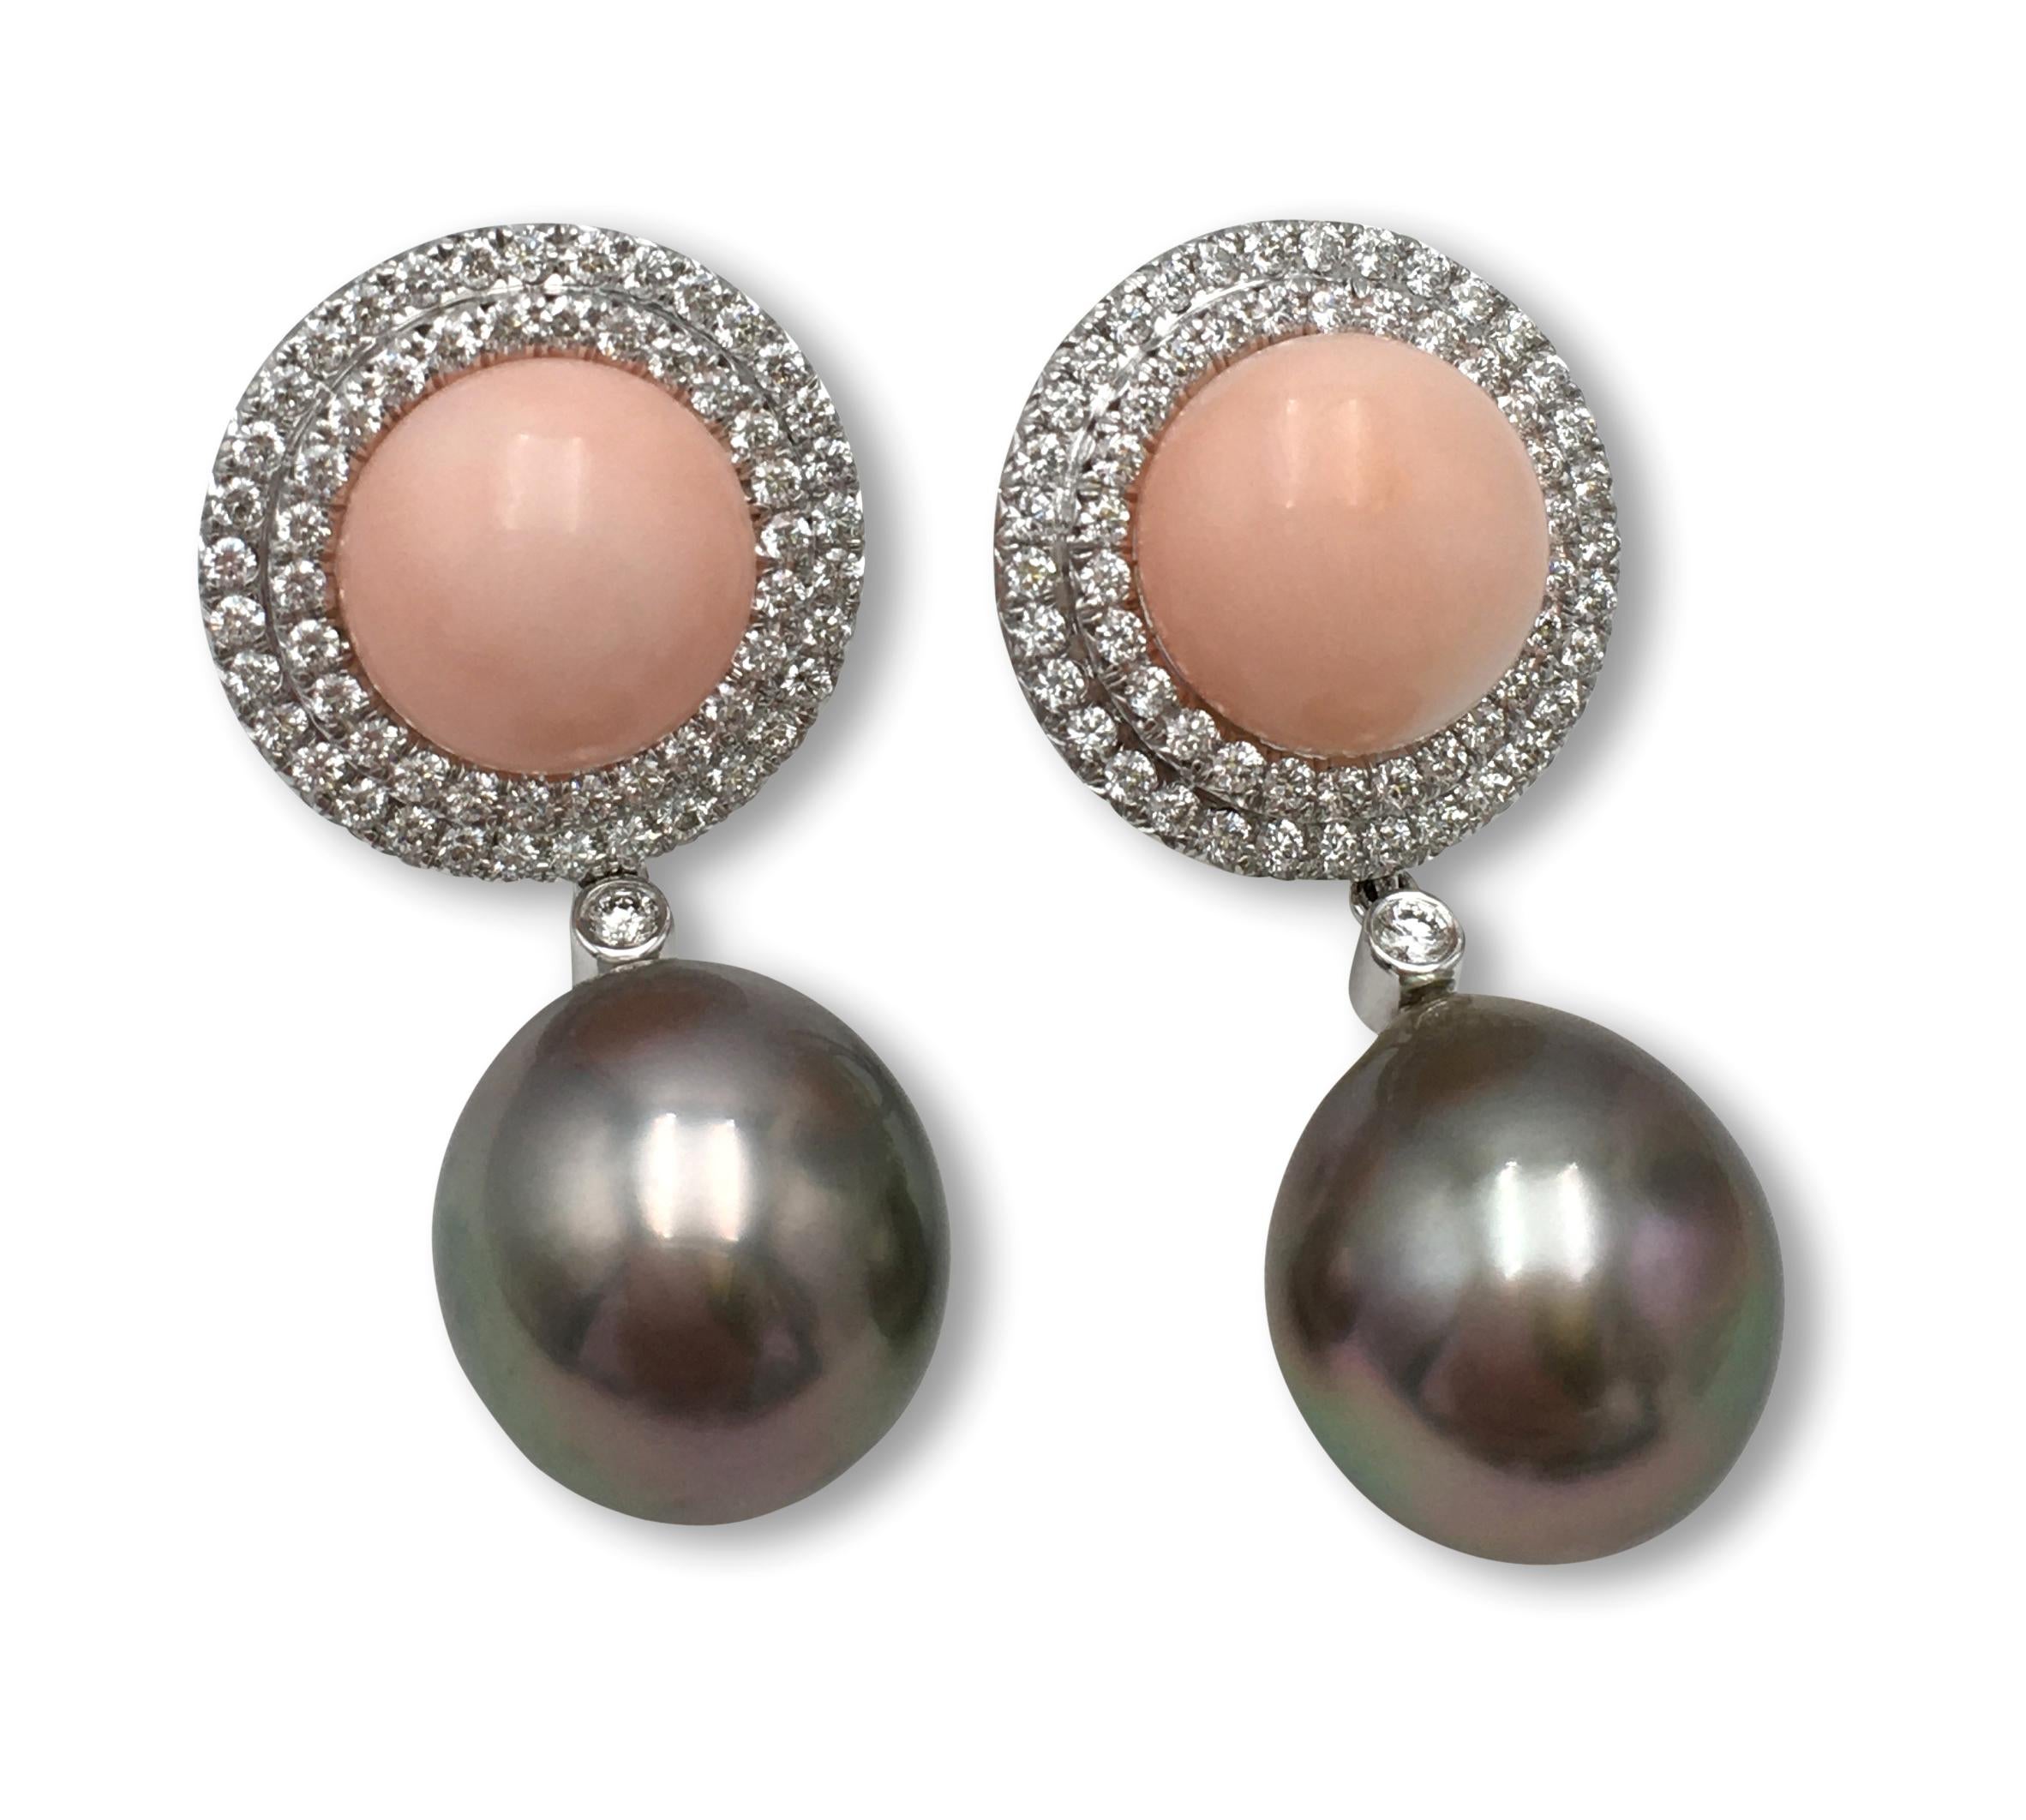 A pair of Tahitian pearl and coral clip earrings set with approximately 1.25 carats total weight of round brilliant cut diamonds (F color, VS clarity). The pearls measure approximately 14.9 x 13.4mm. Coral measures approximately 11 x 7mm. Signed